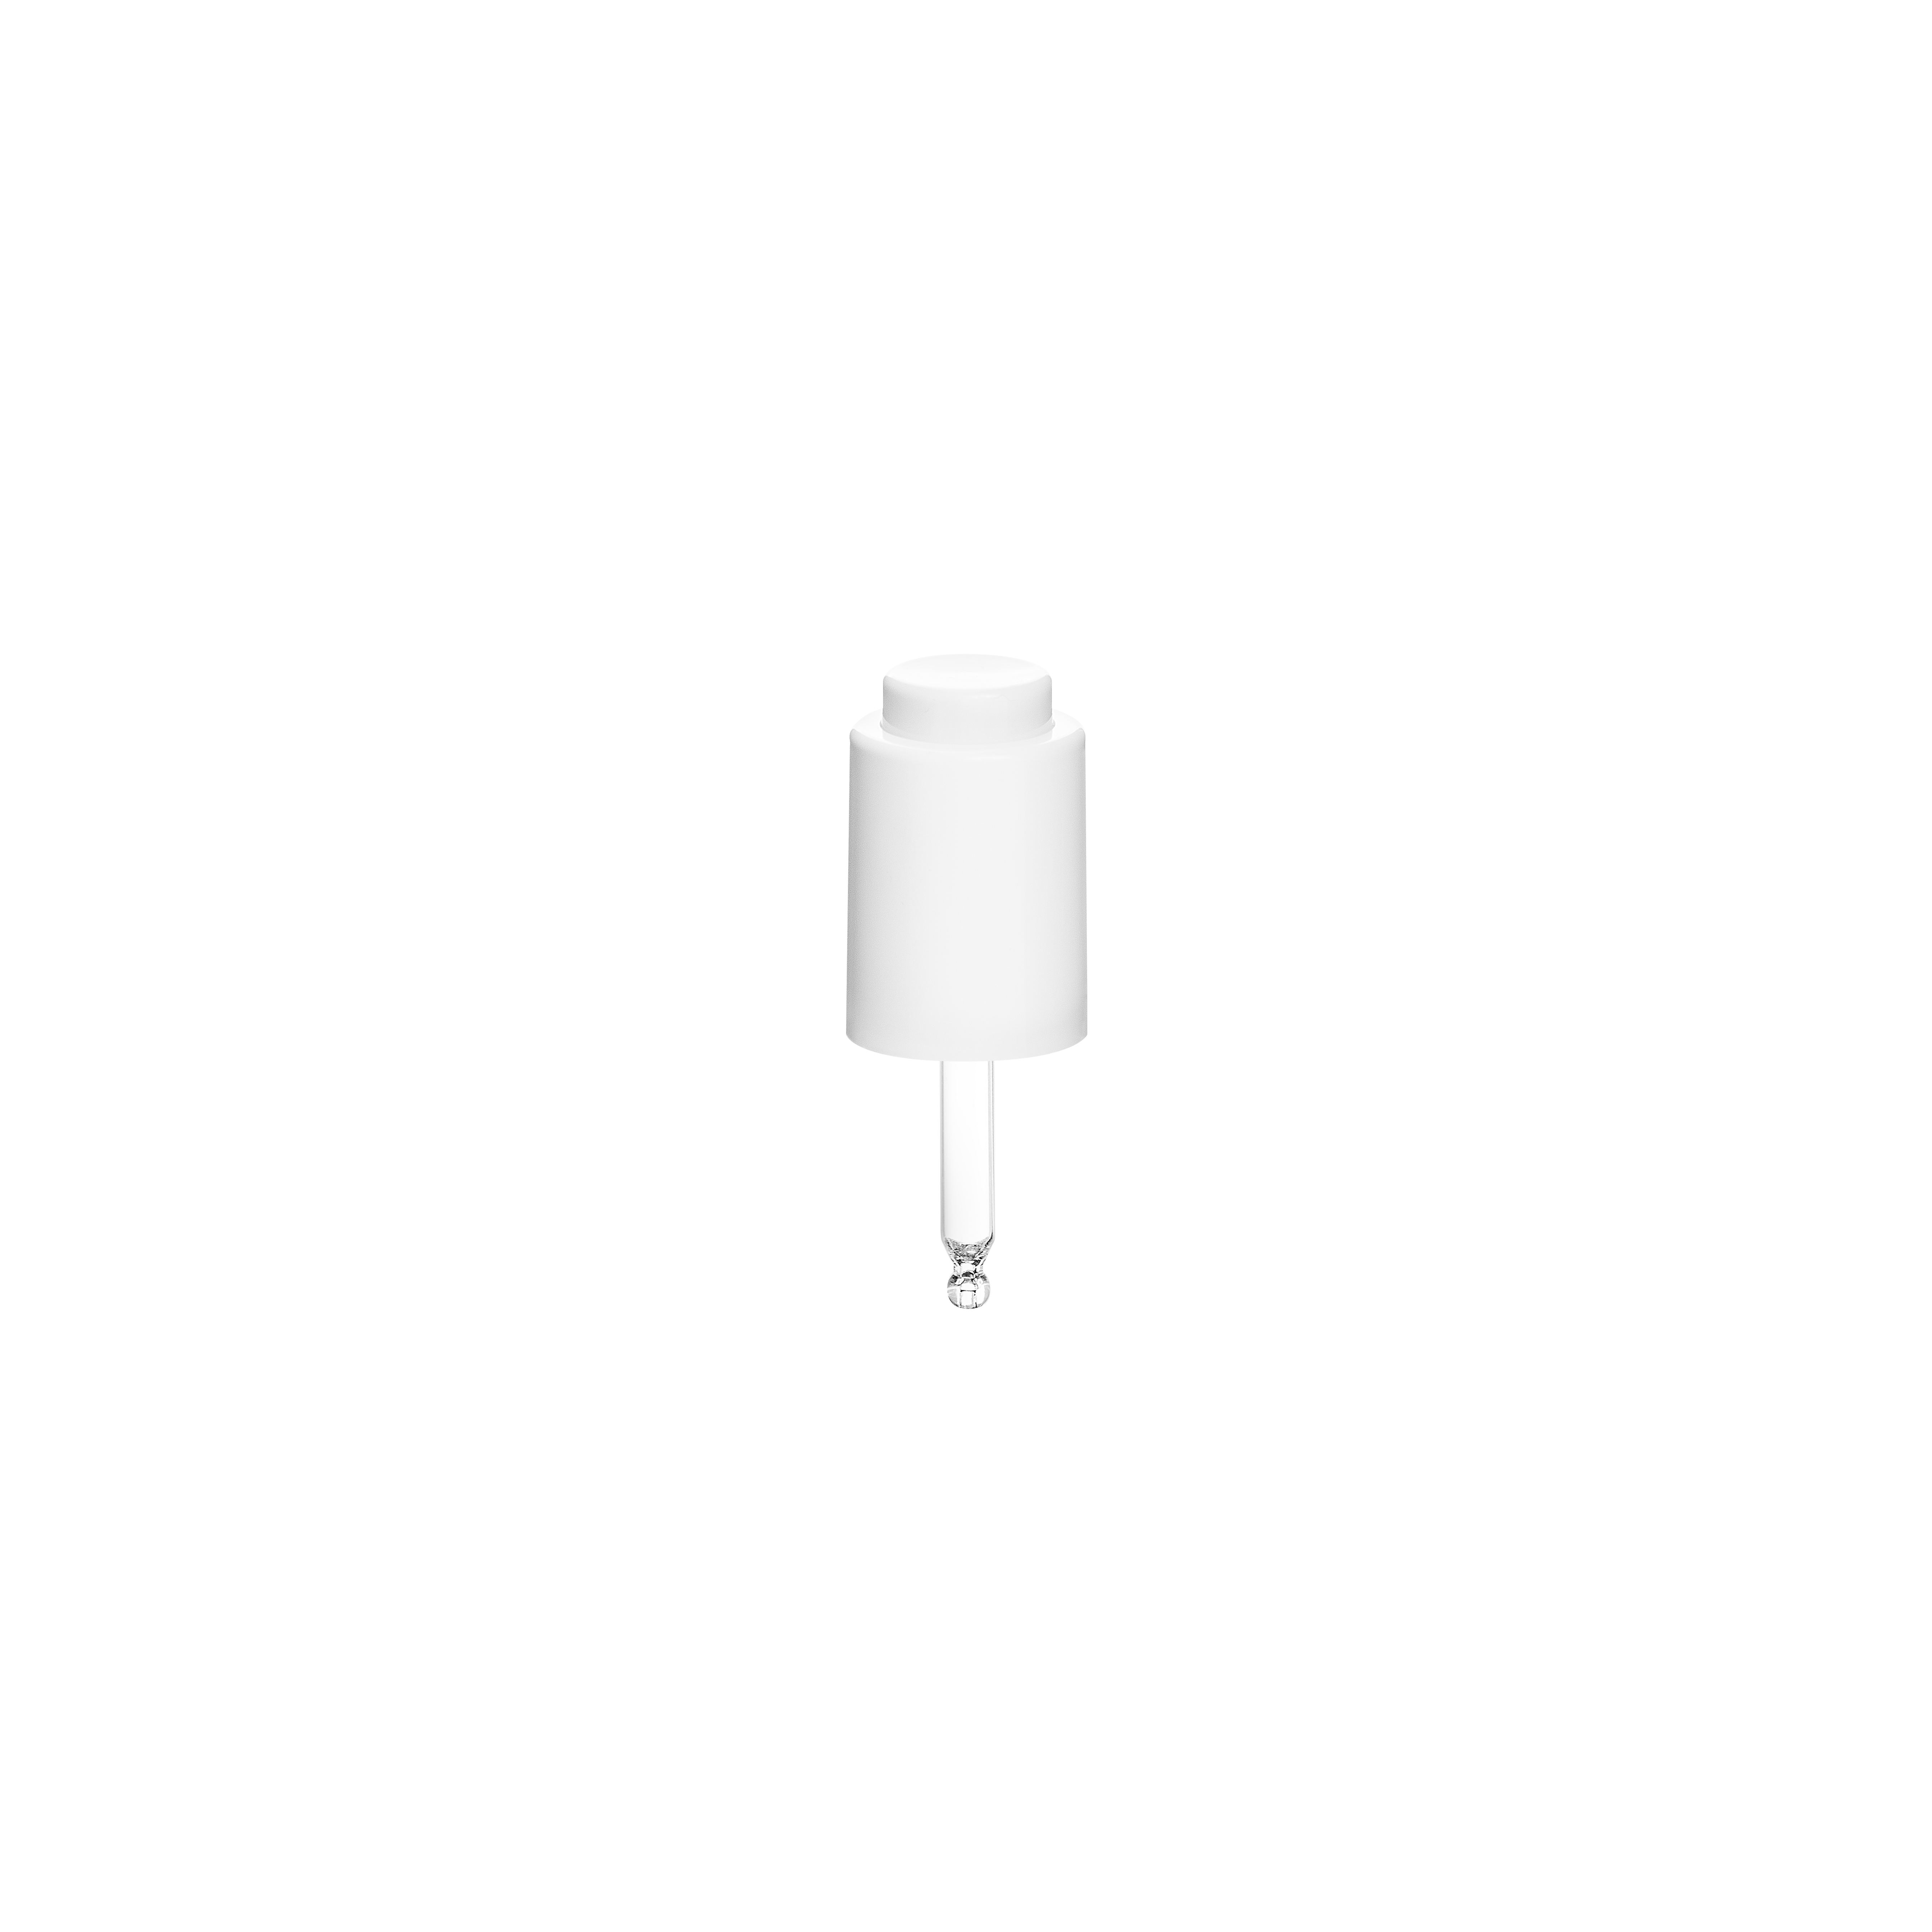 Push-button pipette 18/415, PP/ABS, white glossy finish, white button bulb Nitrile 0.4 ml, ball tip, straight for Laurel 15 ml